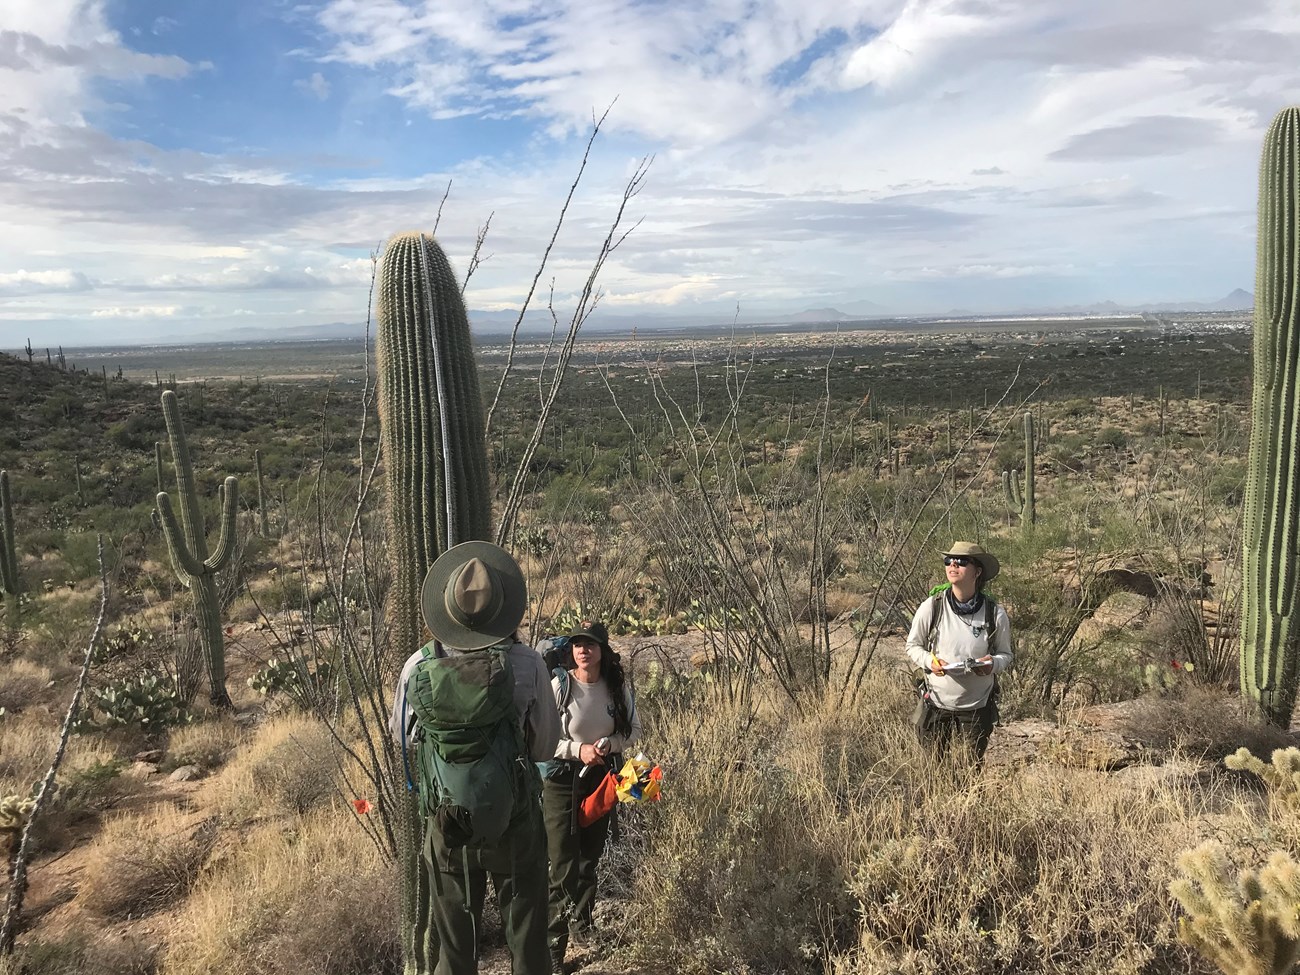 Crew members working together to measure the height of a saguaro